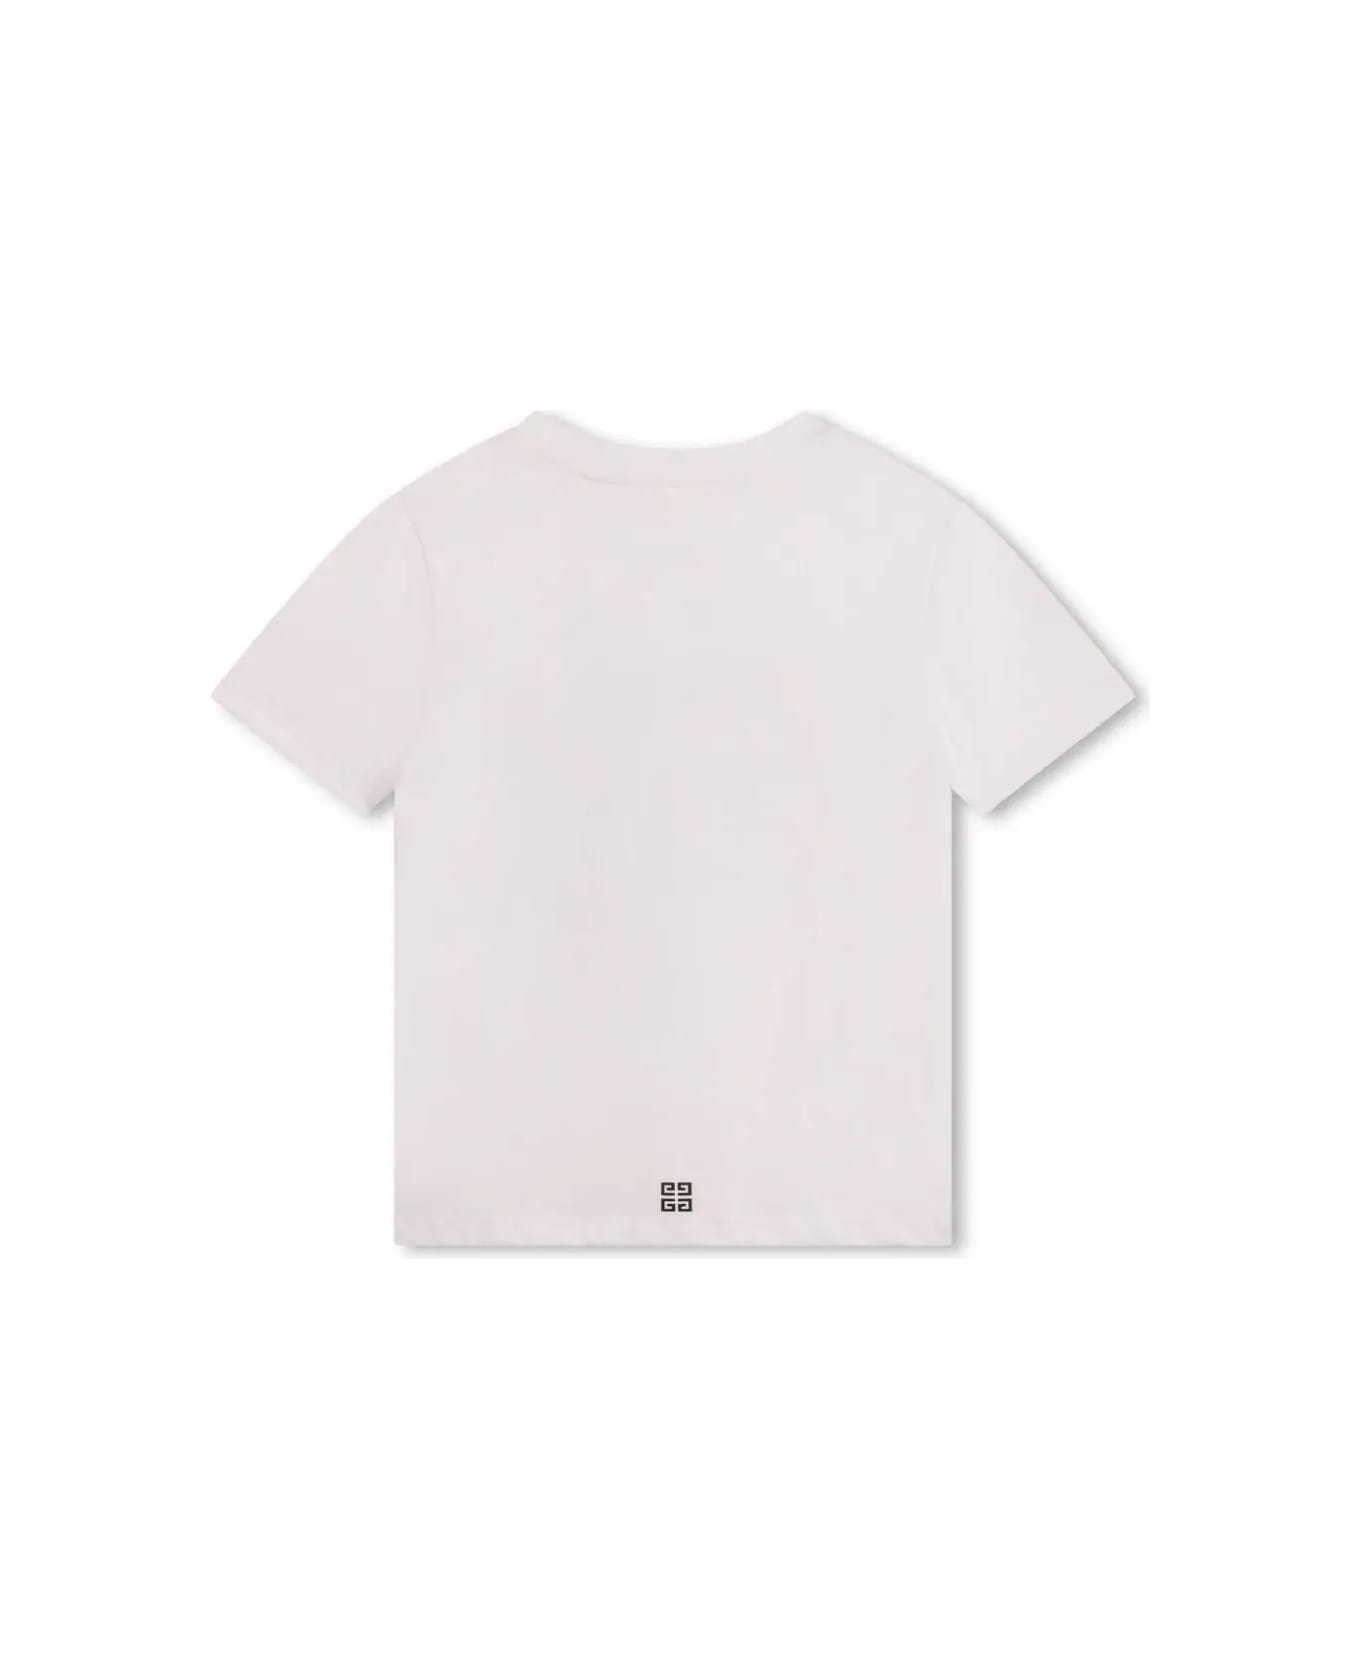 Givenchy White T-shirt With Black Givenchy 4g Print - White